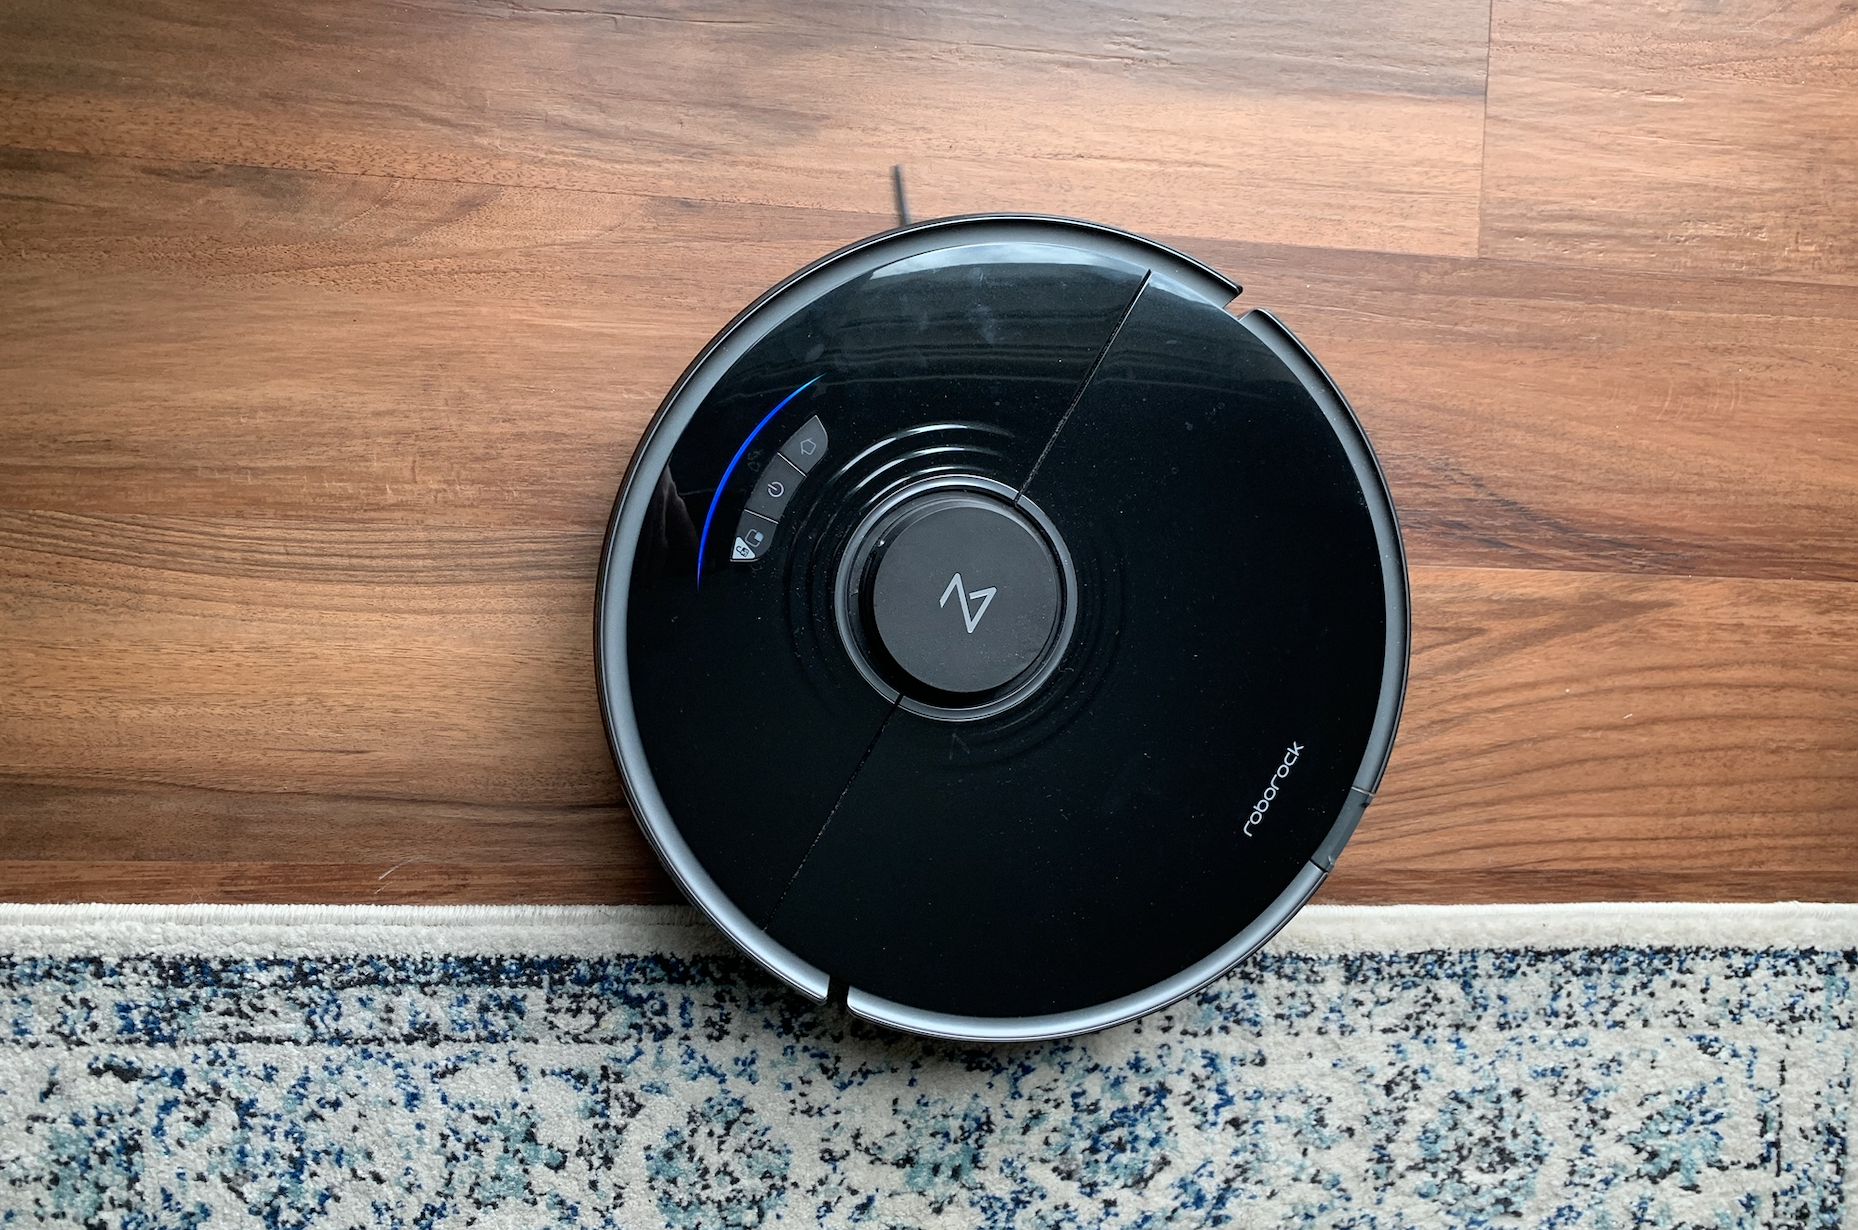 I’m a Dyson stan, but the Roborock S7 vacuum mop made life *really* easy